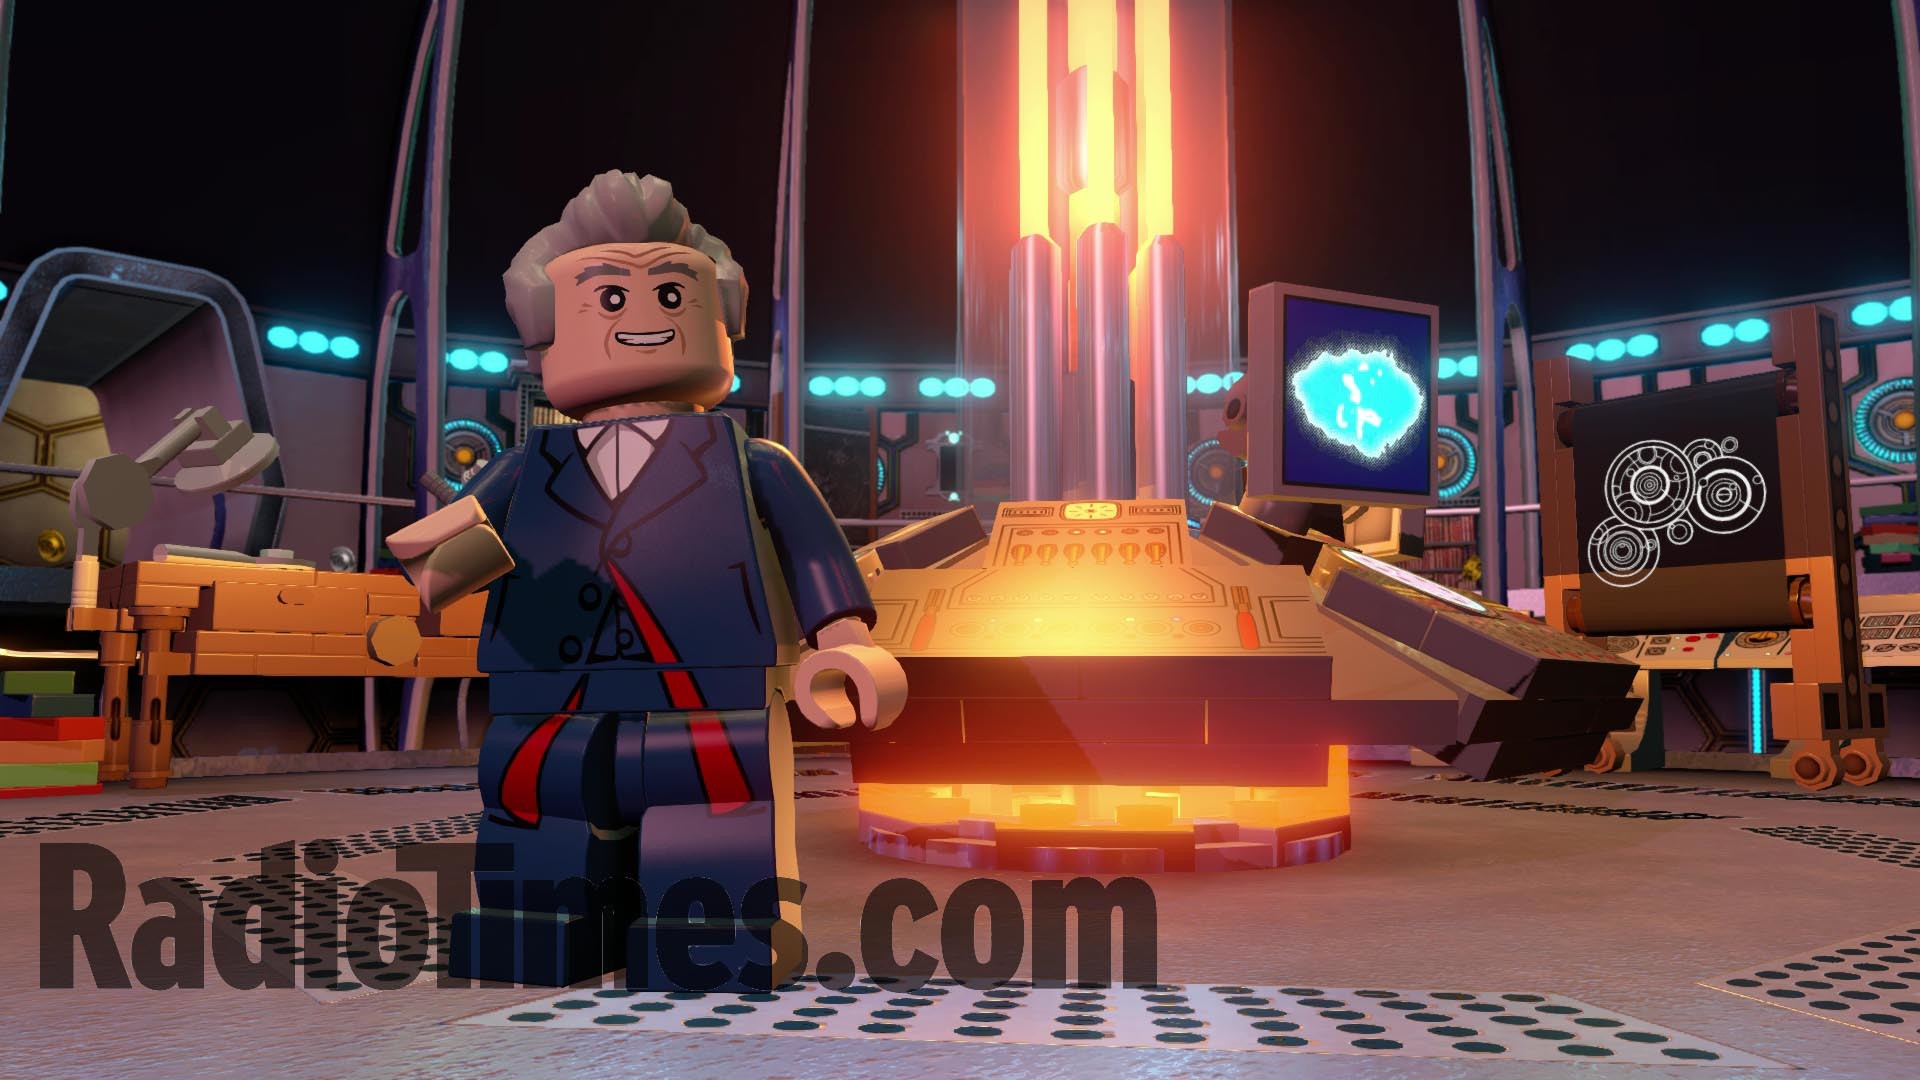 Doctor Who Lego Dimensions pack see every Tardis interior, from William Hartnell to David